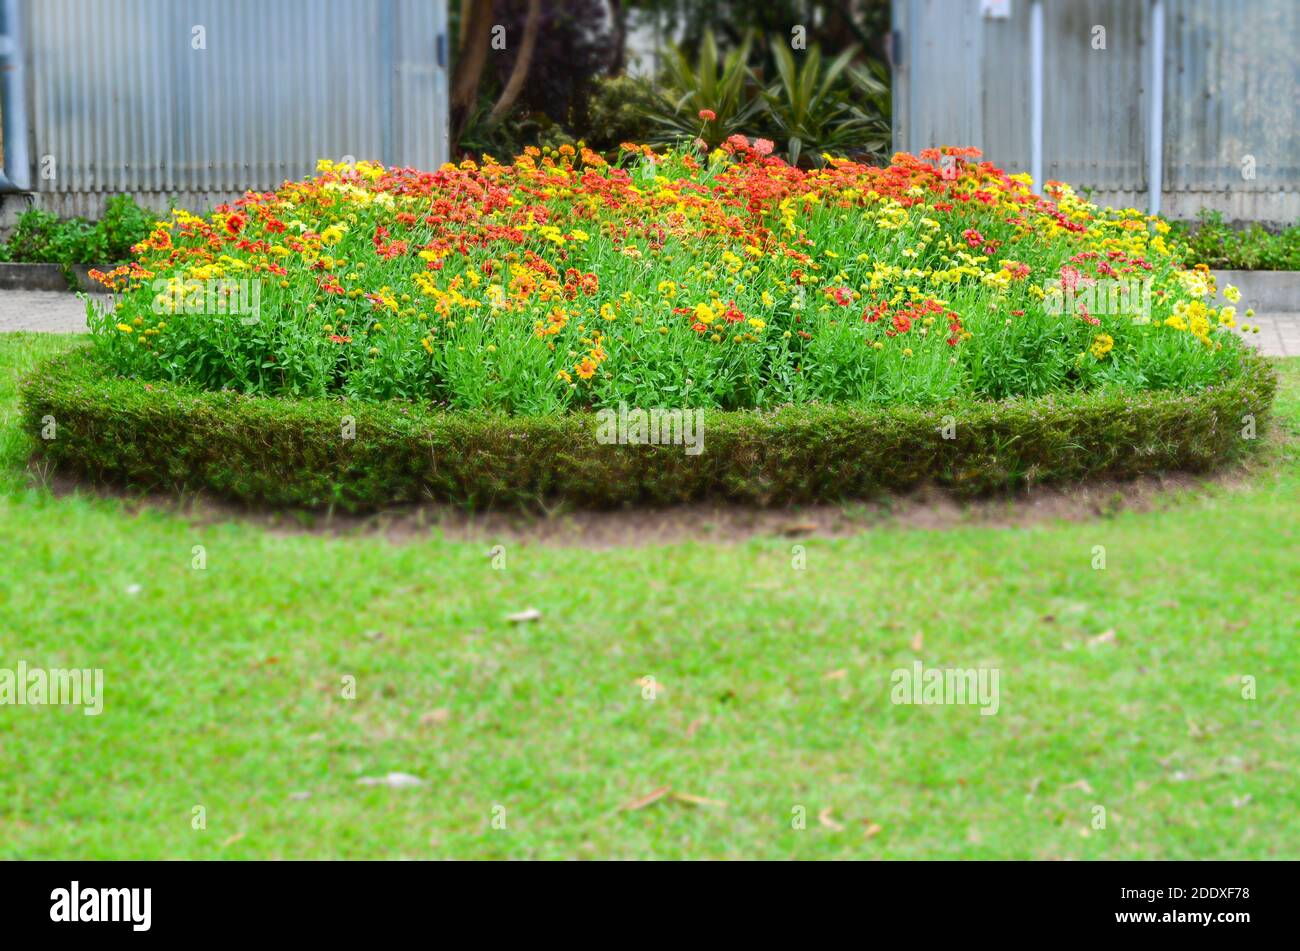 colorful Gaillardia or blanket flowers in the garden Stock Photo